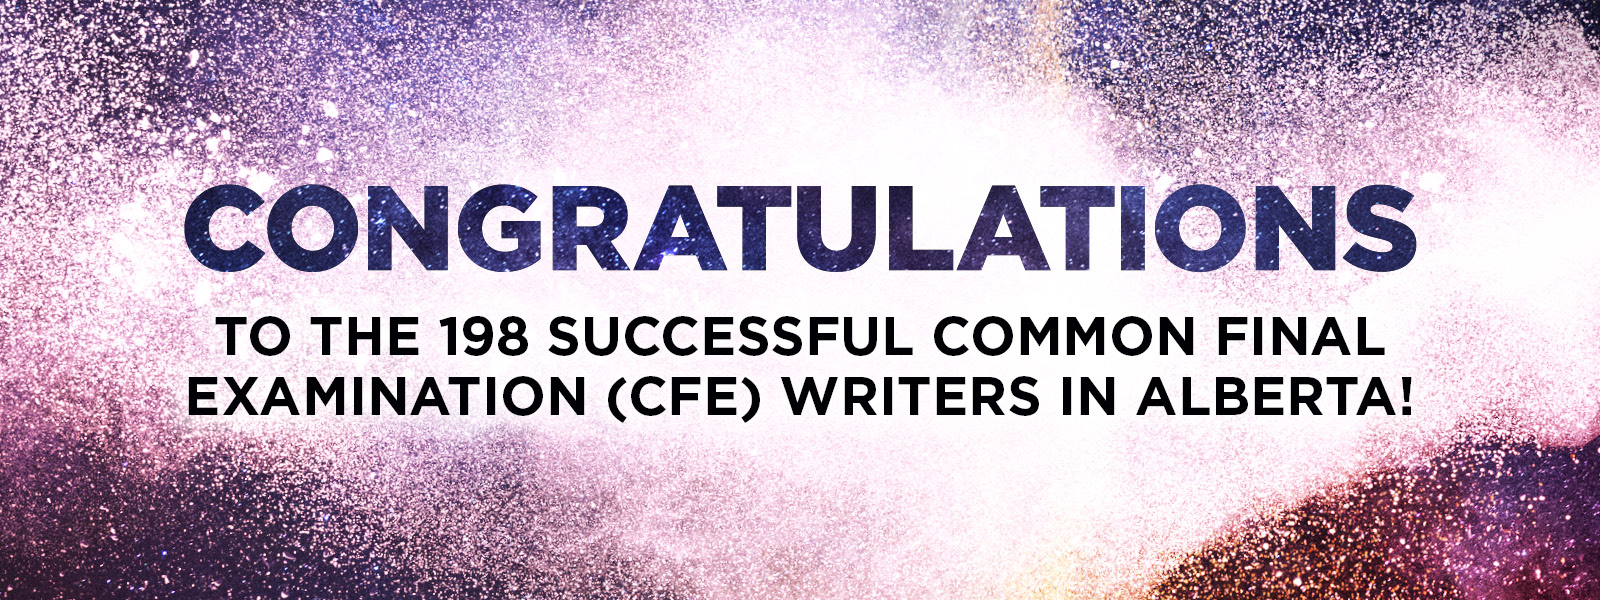 CFE graphic. Text reads "Congratulations CFE Writers! Congratulations to the 198 successful common final examination (CFE) writers in Alberta!"